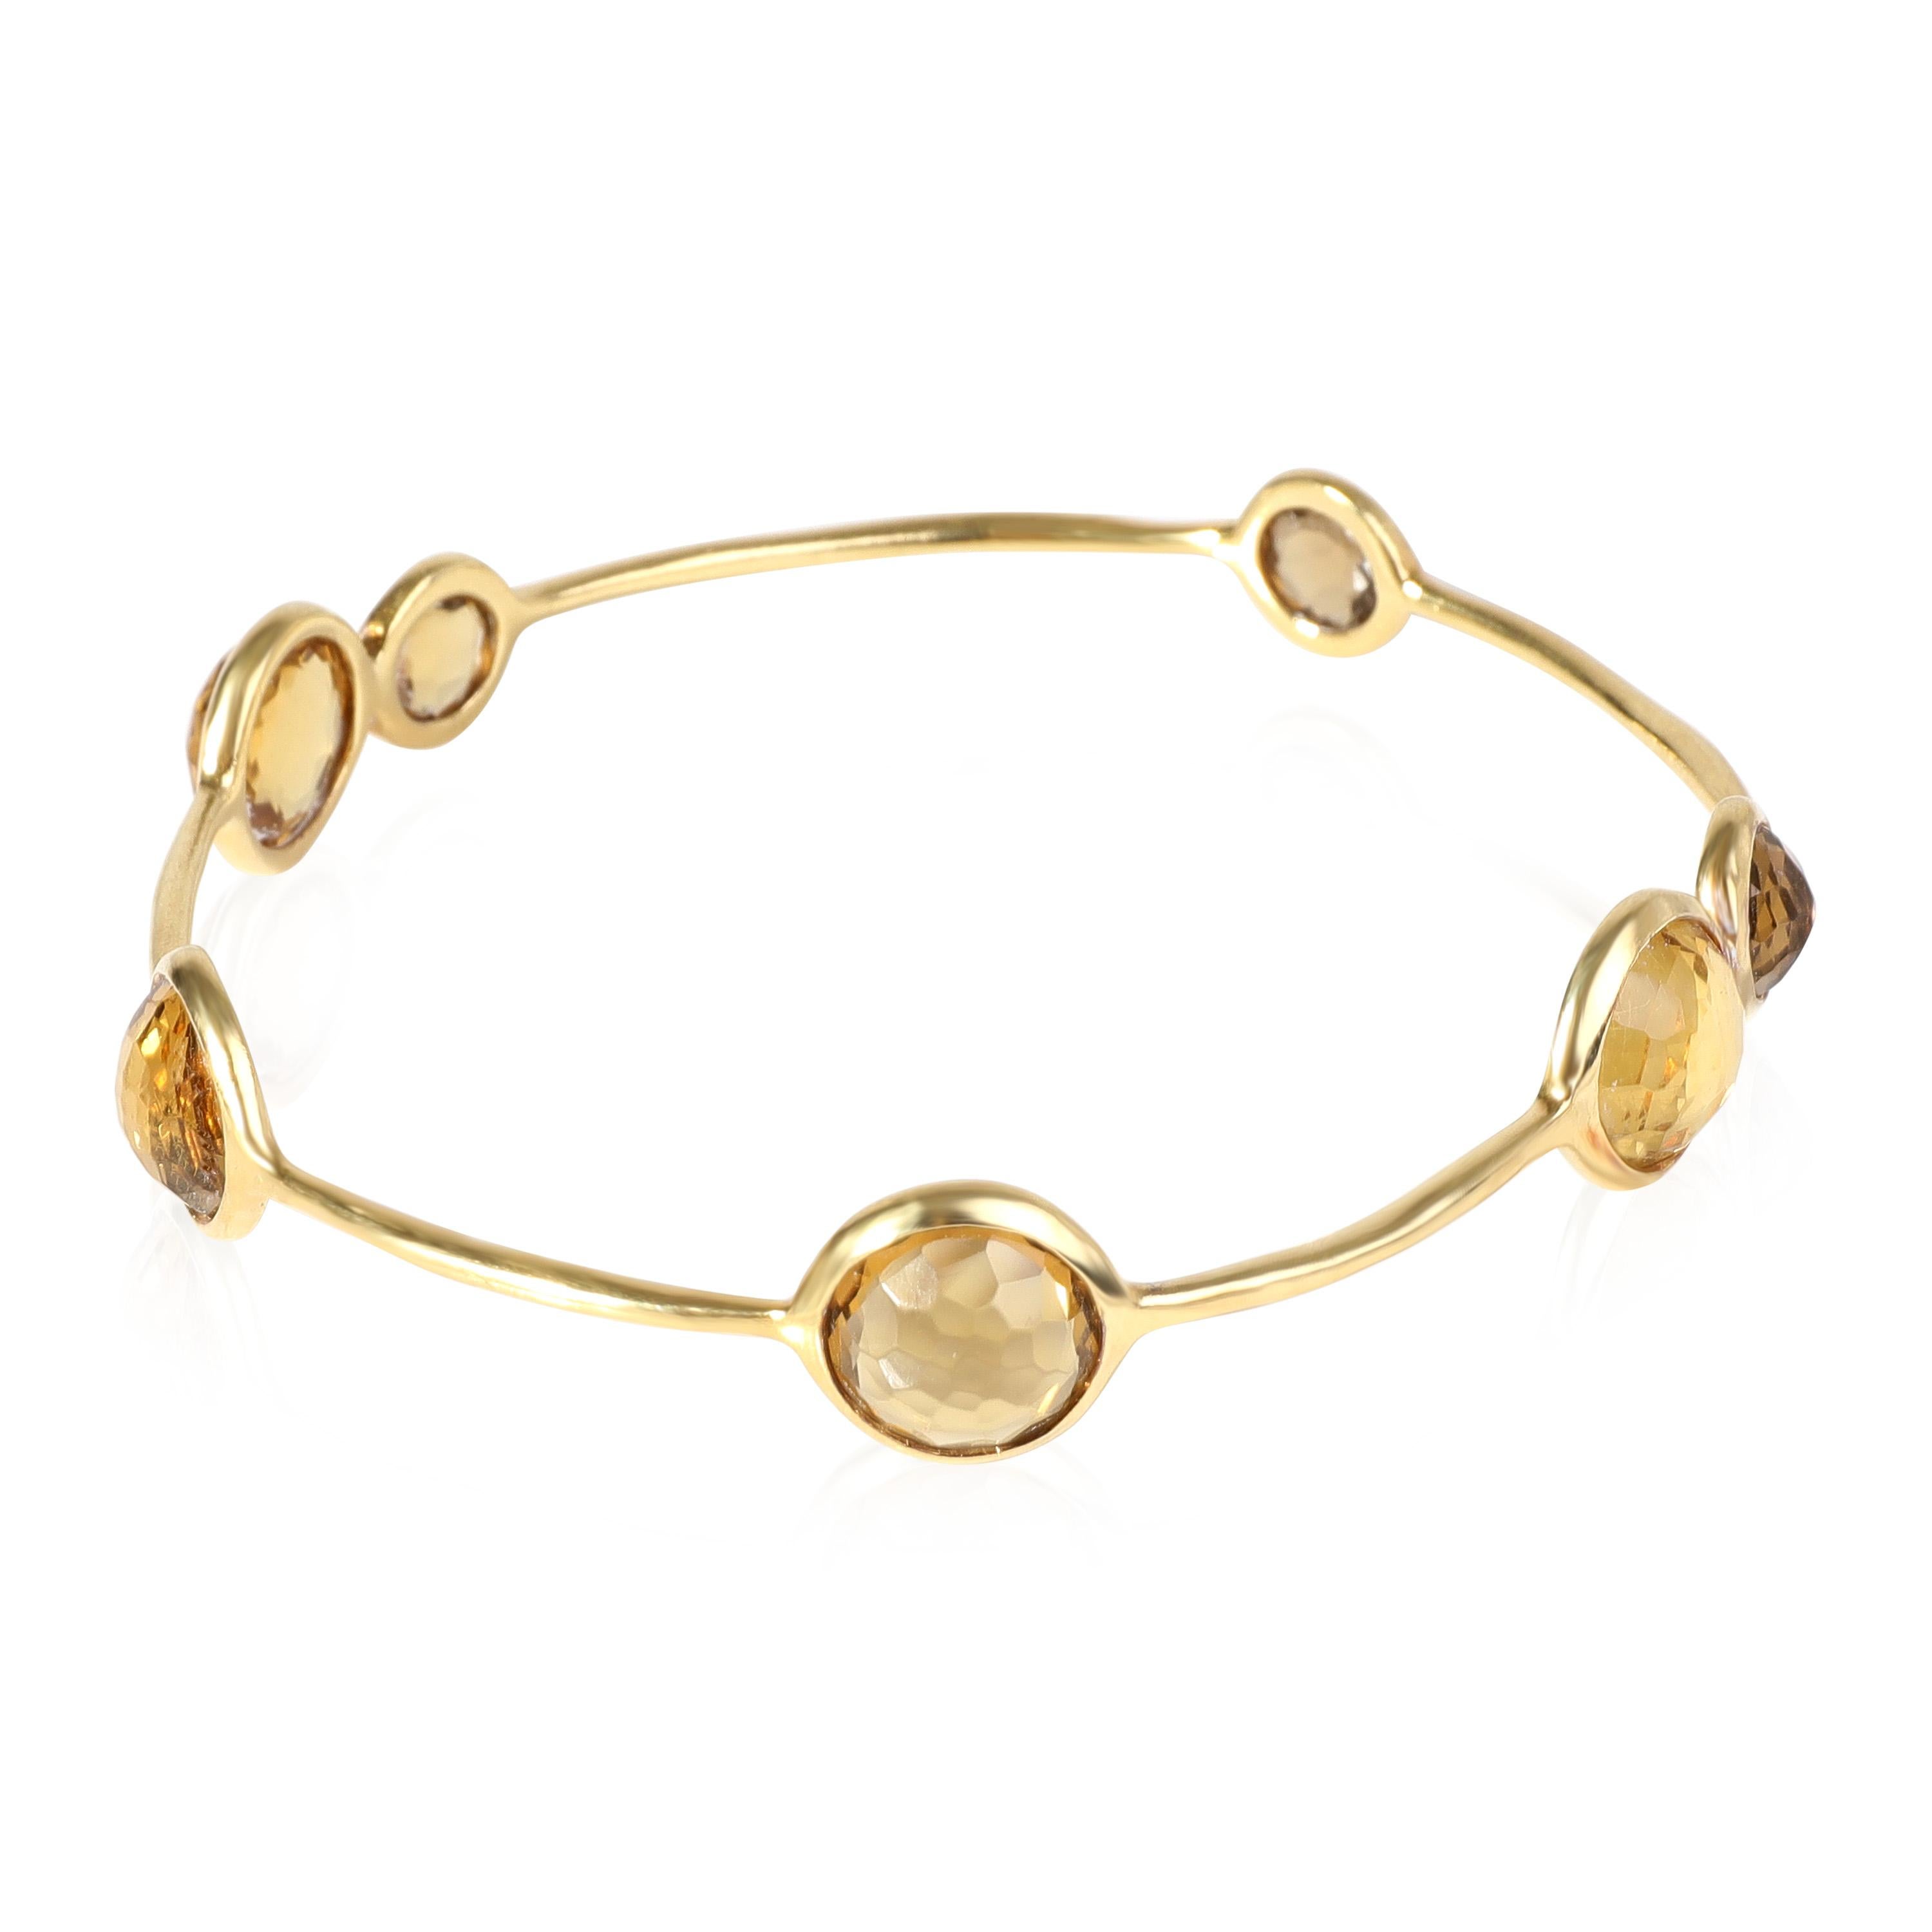 Ippolita Lollipop Citrine Bracelet in 18k Yellow Gold In Excellent Condition For Sale In New York, NY